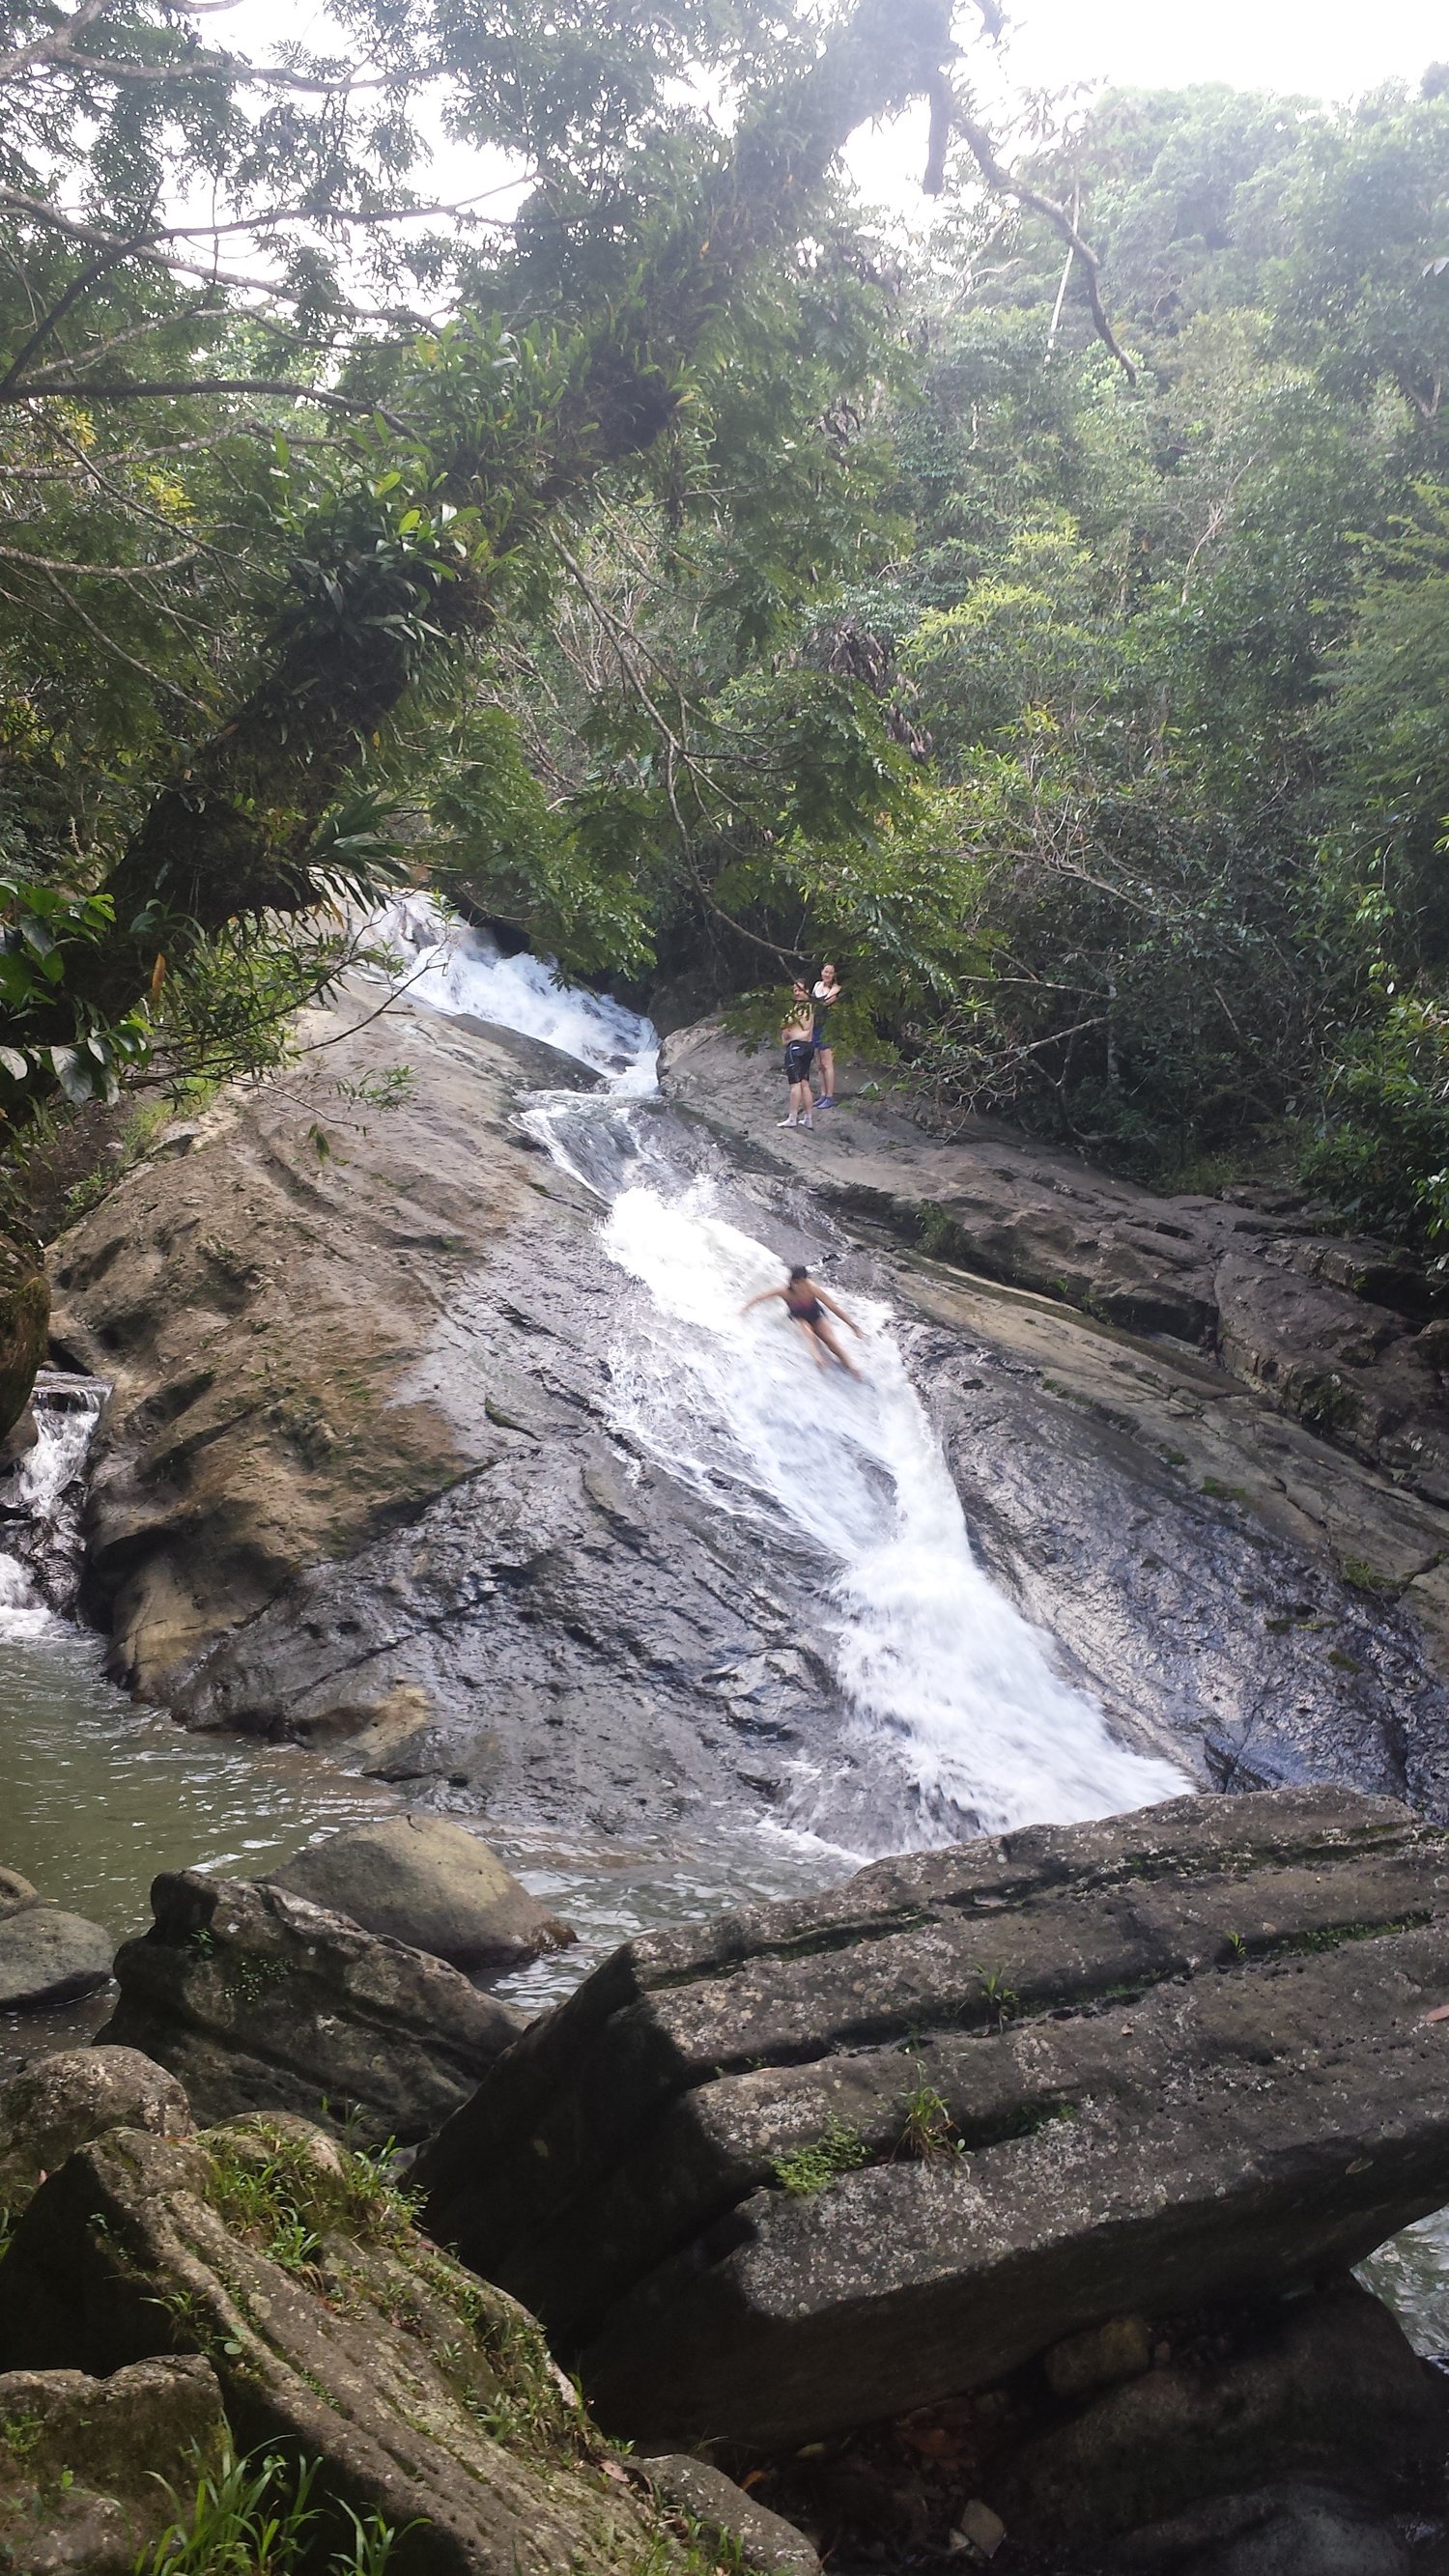 Local waterfall in Puerto Rico - pretty sure it wasn't mean to slide down. Yep that's me - "just lean forward, you'll be fine!"